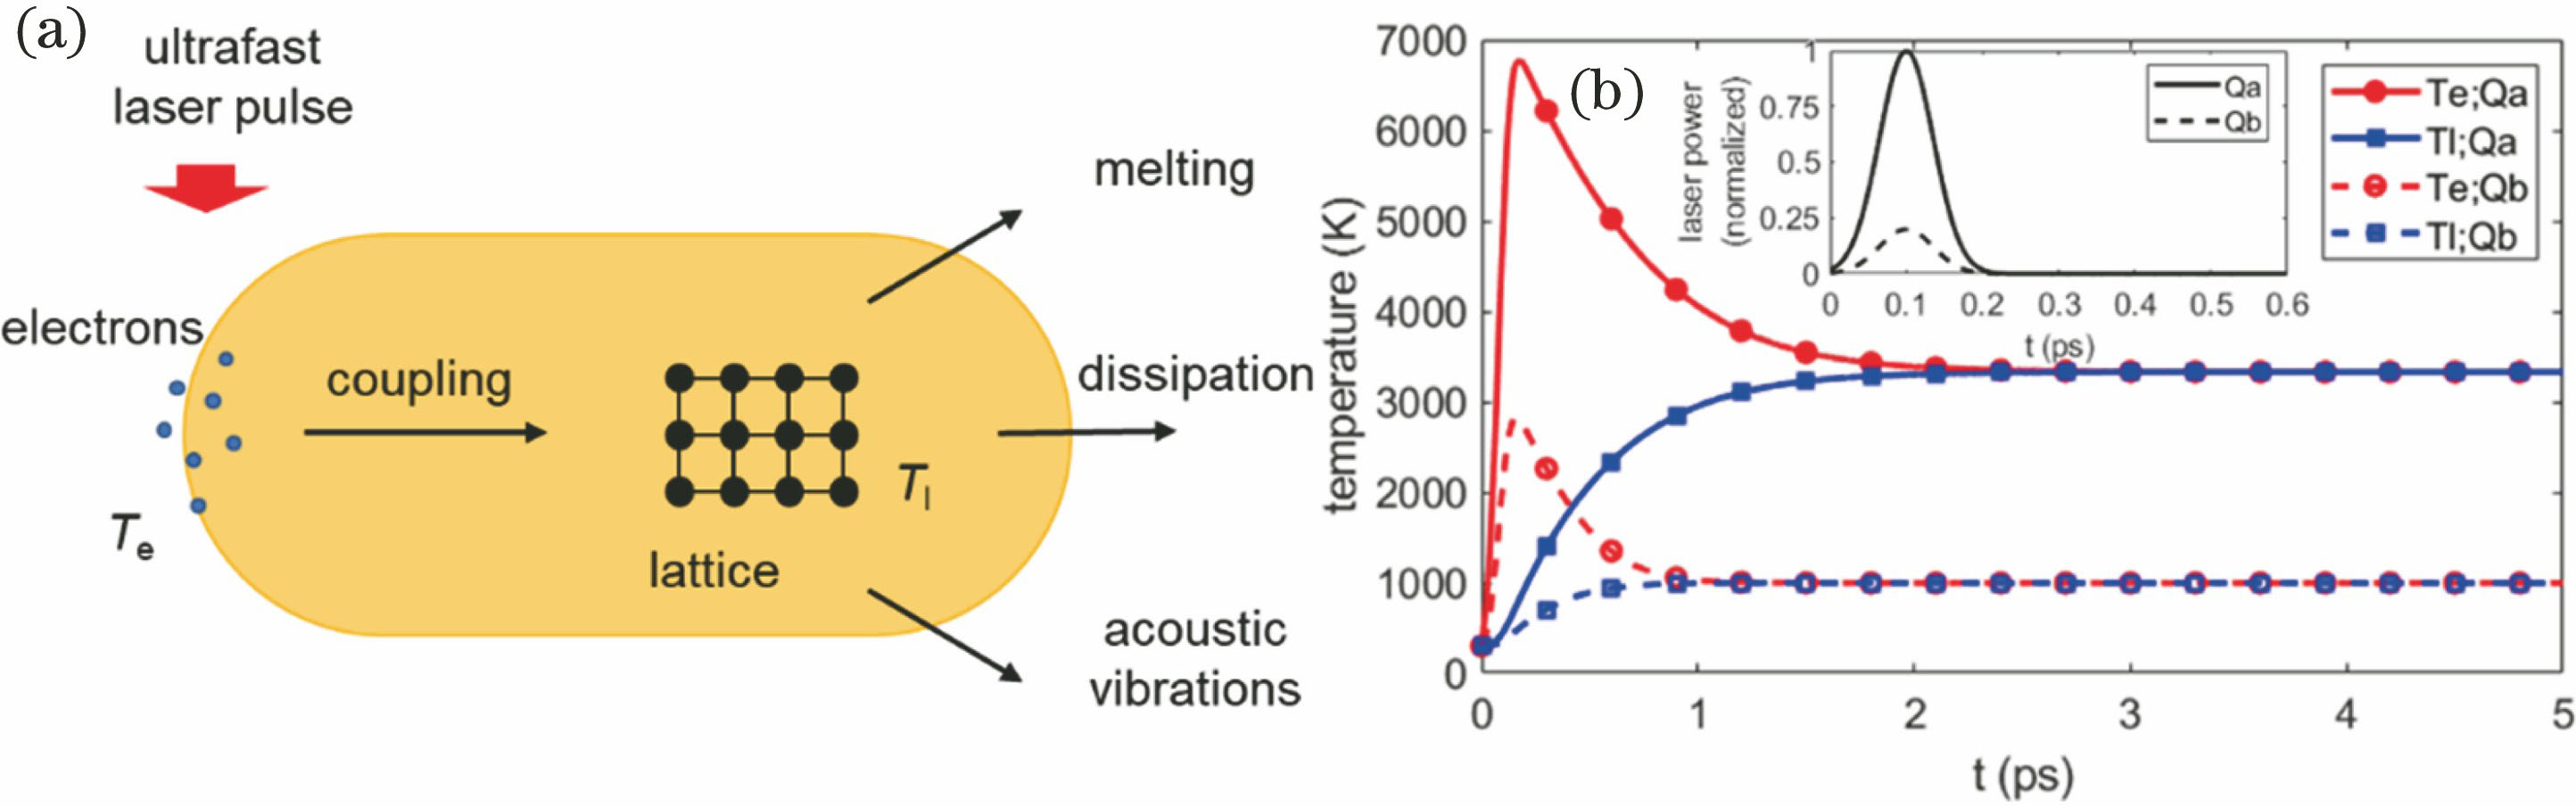 Schematic of two temperature model (TTM) for plasmonic materials. (a) Schematic of excitation and relaxation of electrons and lattice; (b) variations of electron temperature Te and lattice temperature Tl with time obtained by simulation after fetosecond laser heating with power densities of Qa and Qb (Qa>Qb)